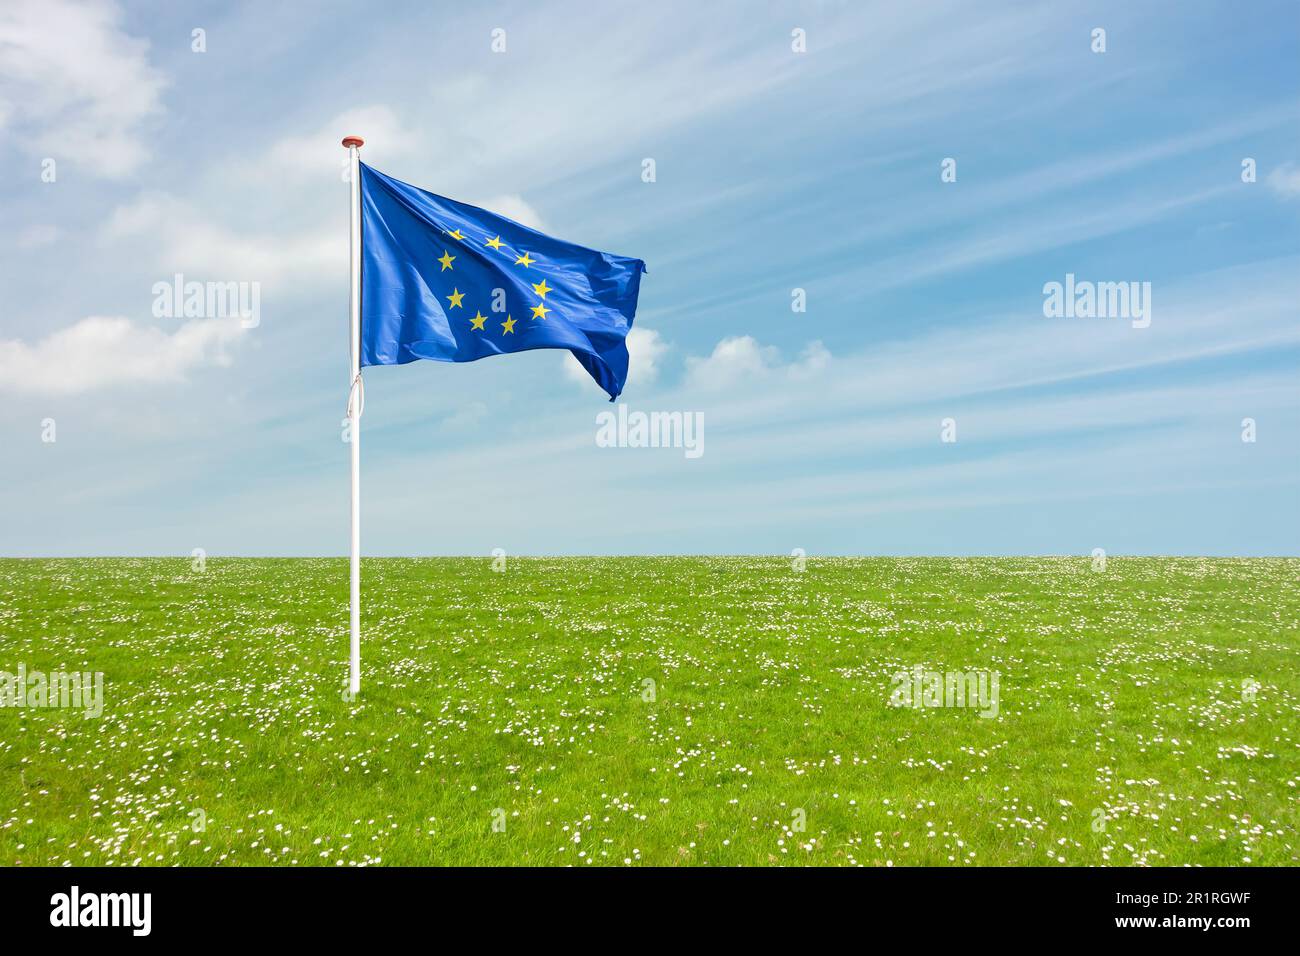 Waving flag of the European Union on a grass meadow with blooming flowers Stock Photo